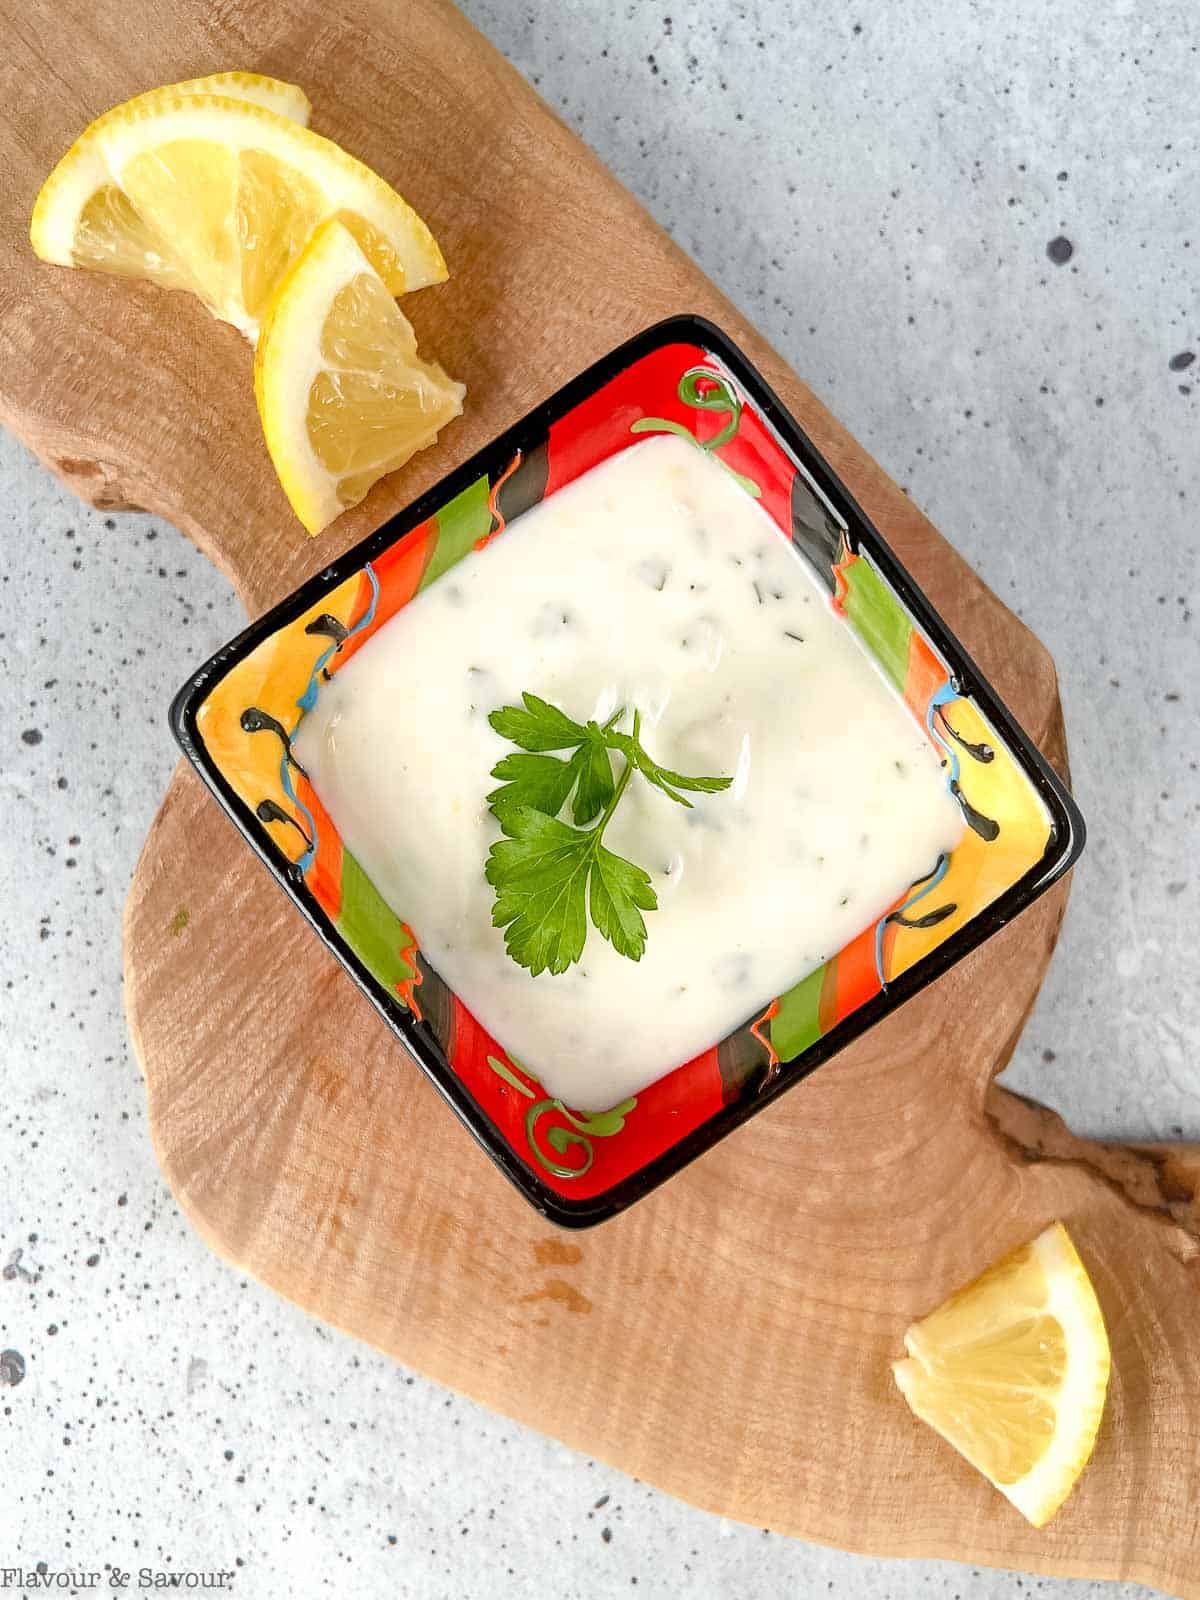 A small square dish of lemon aioli with a sprig of parsley.